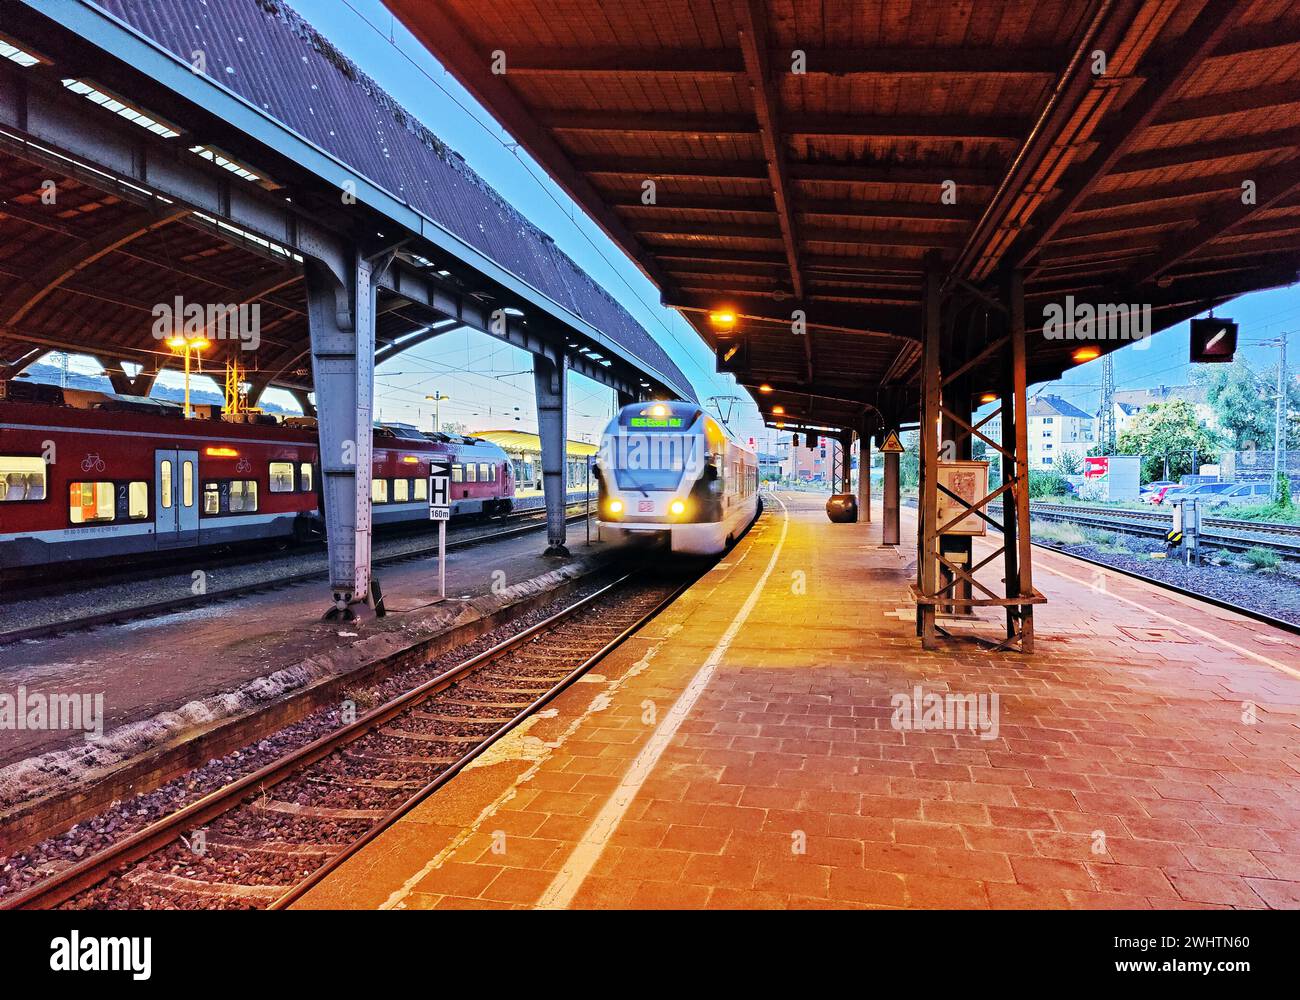 Deserted platform with arriving train in the evening, main station, Hagen, North Rhine-Westphalia, Germany Stock Photo